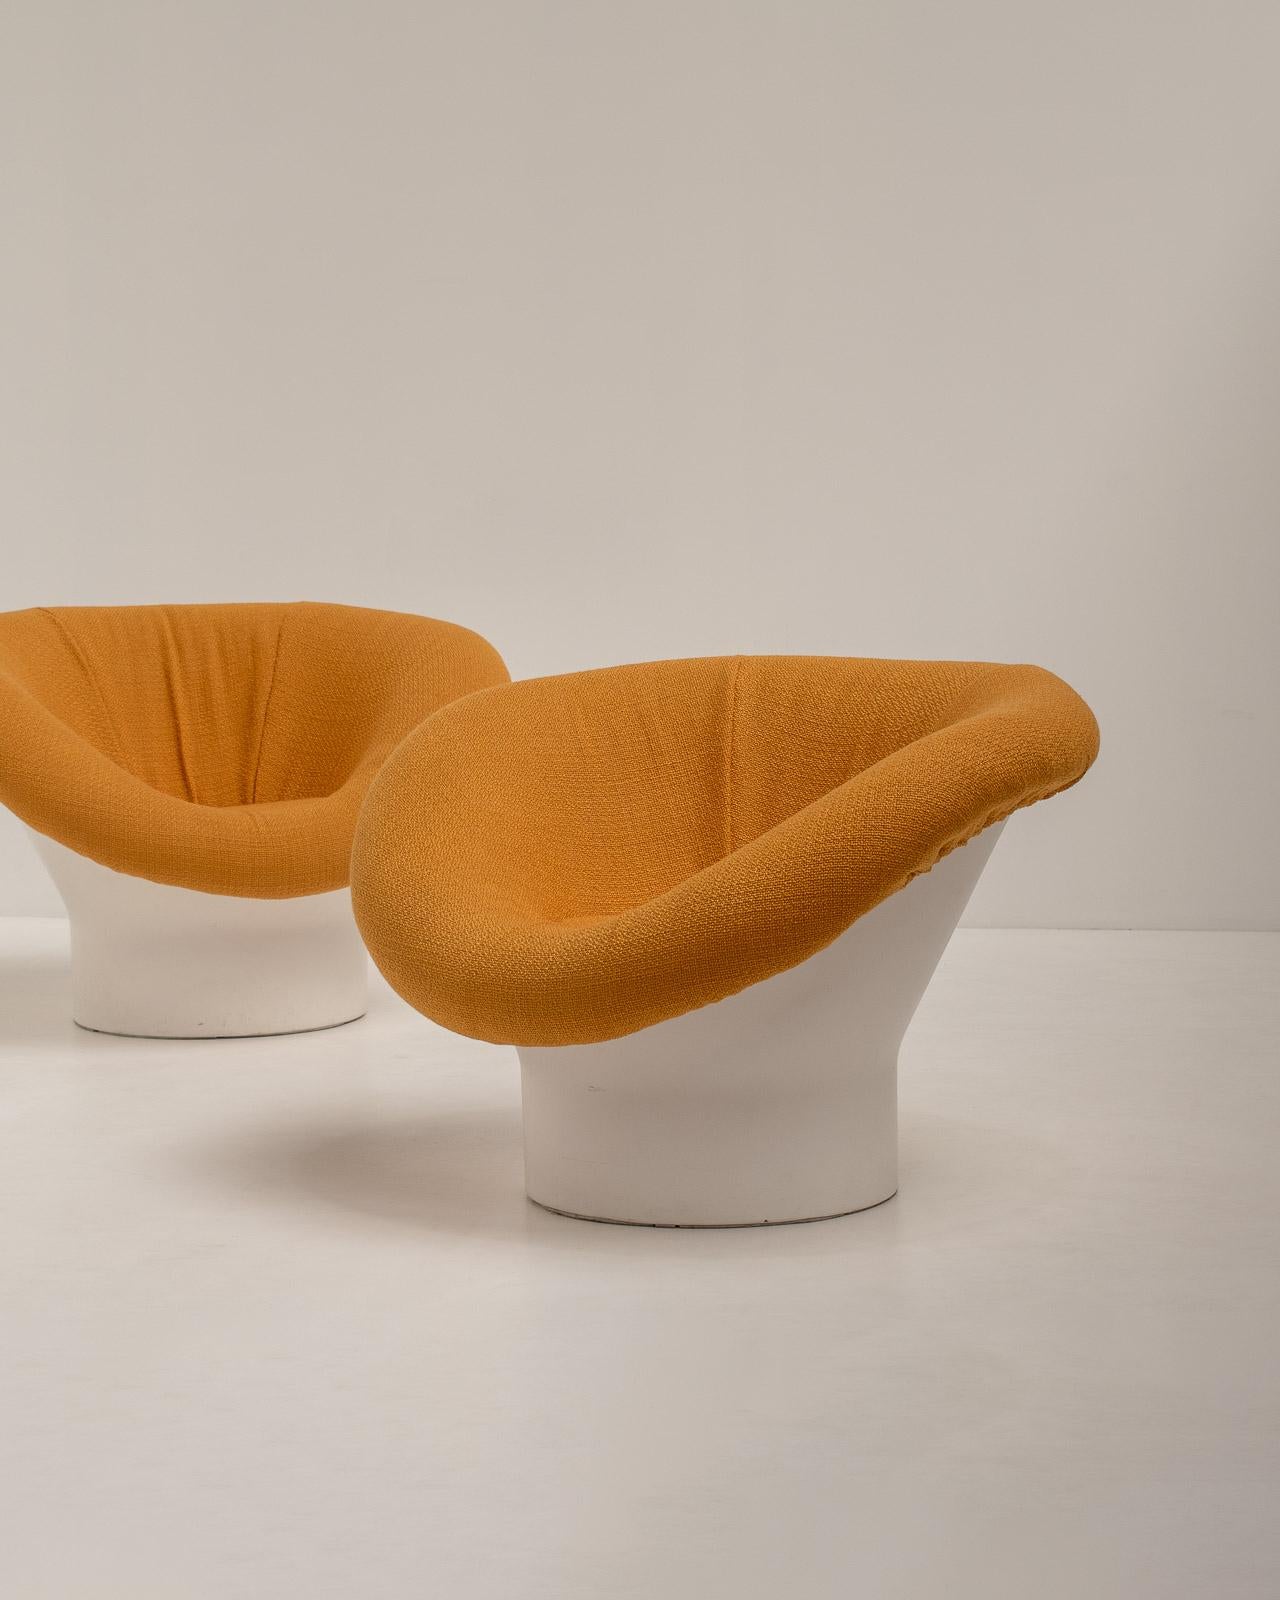 Pair of Krokus Lounge Chairs by Lennart Bender for Ulferts, Sweden 1960s For Sale 5